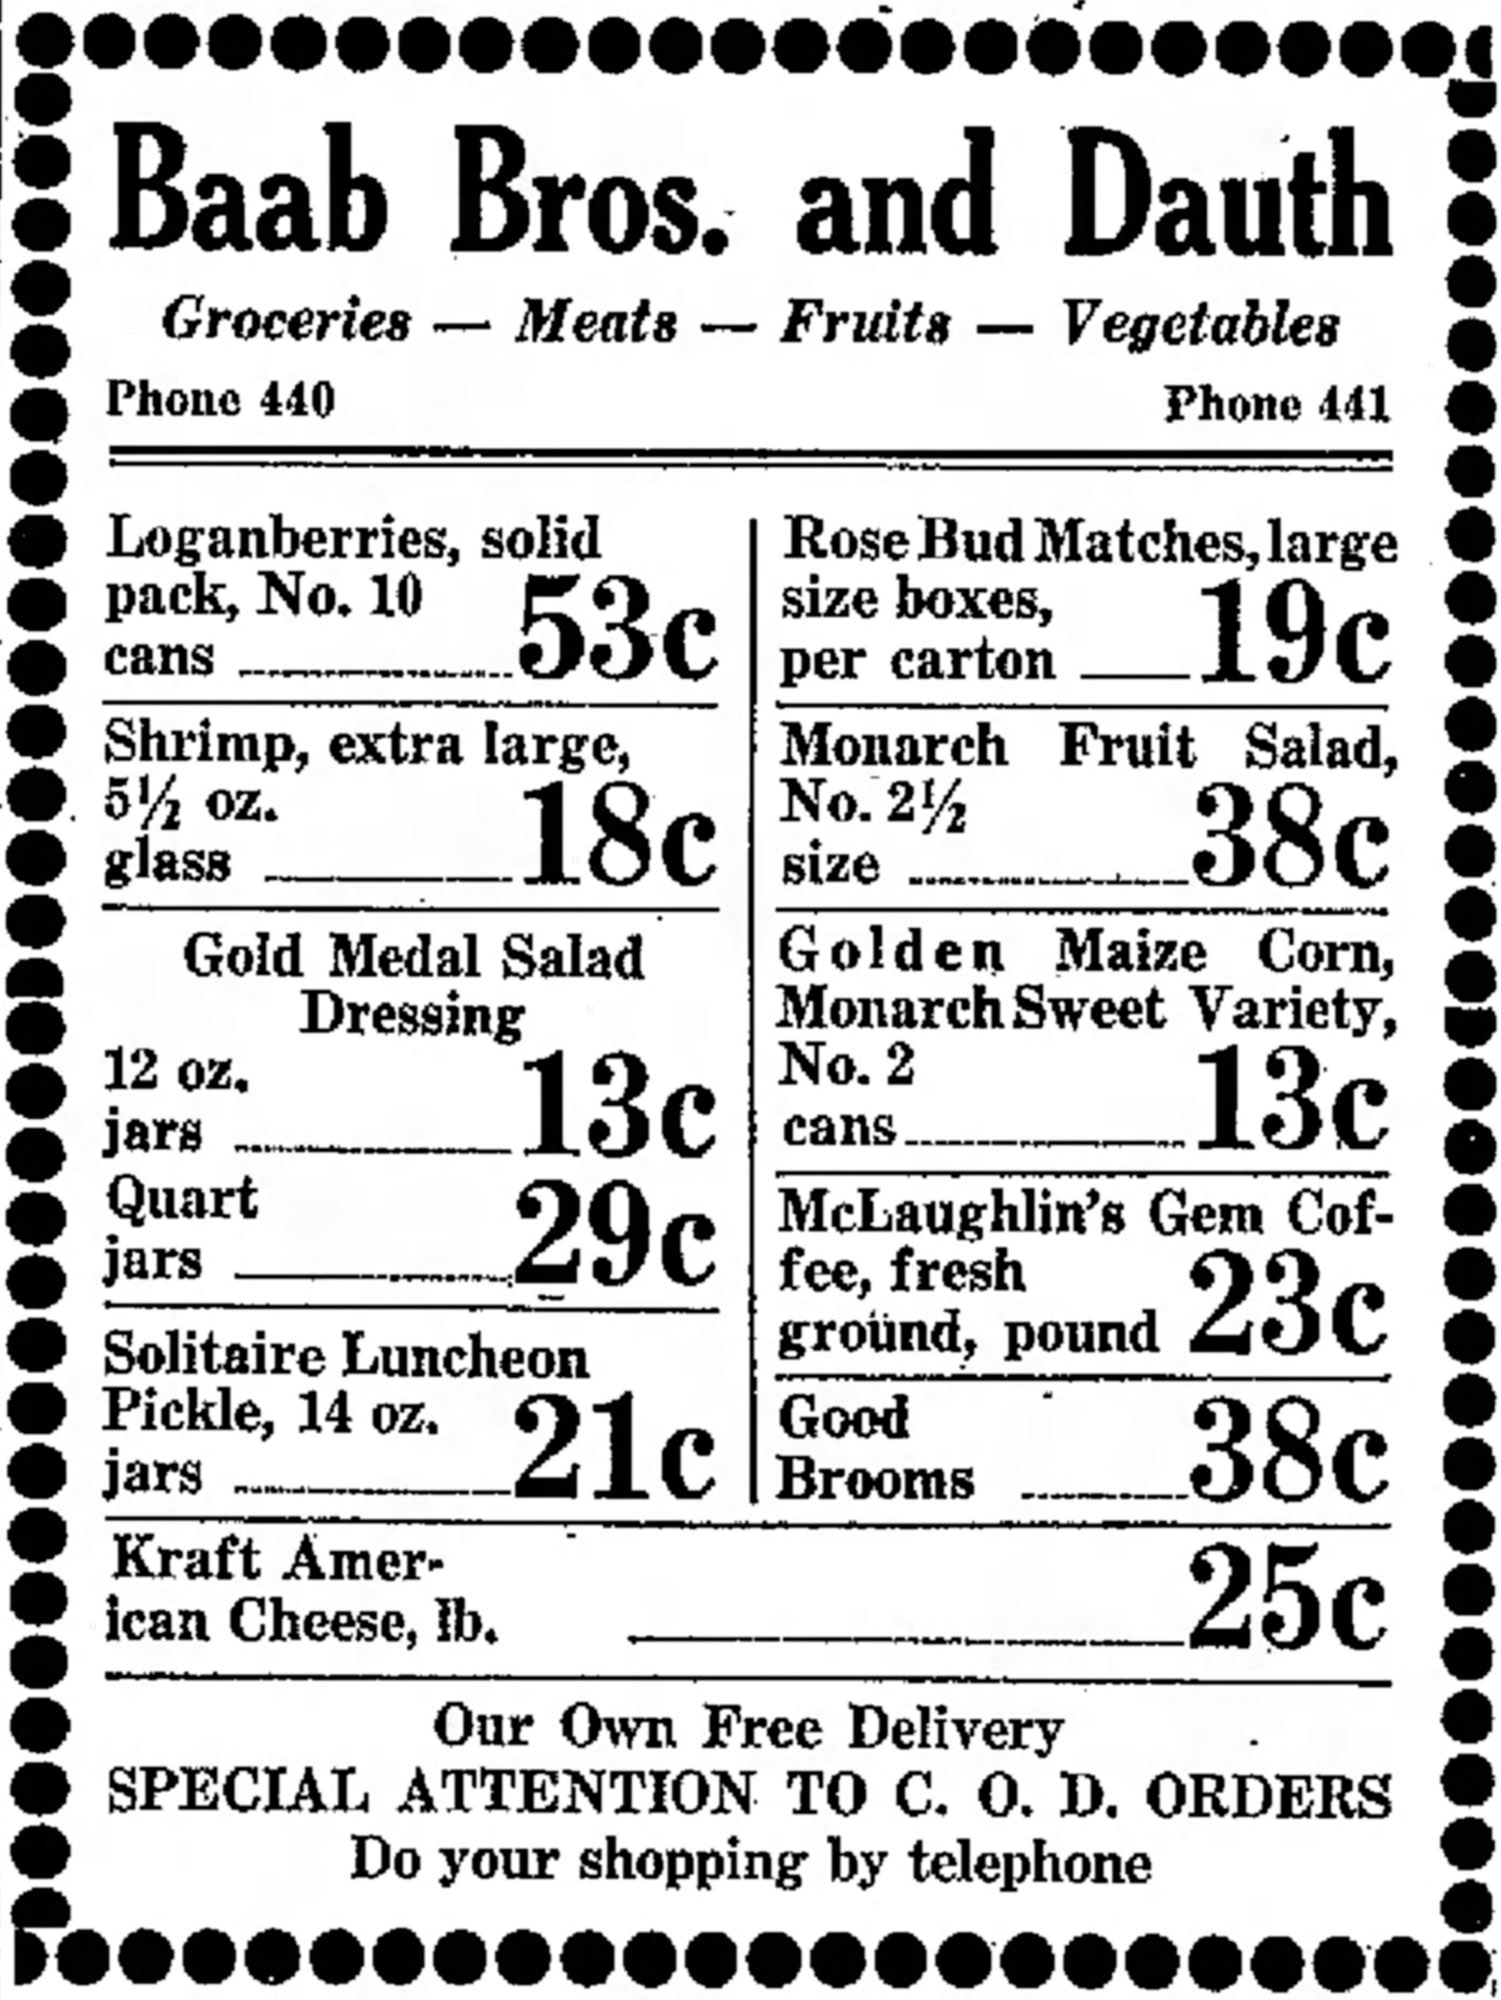 Dauth Family Archive - 1932-03-30 - Greeley Daily Tribune - Baab Bros and Dauth Advertisement